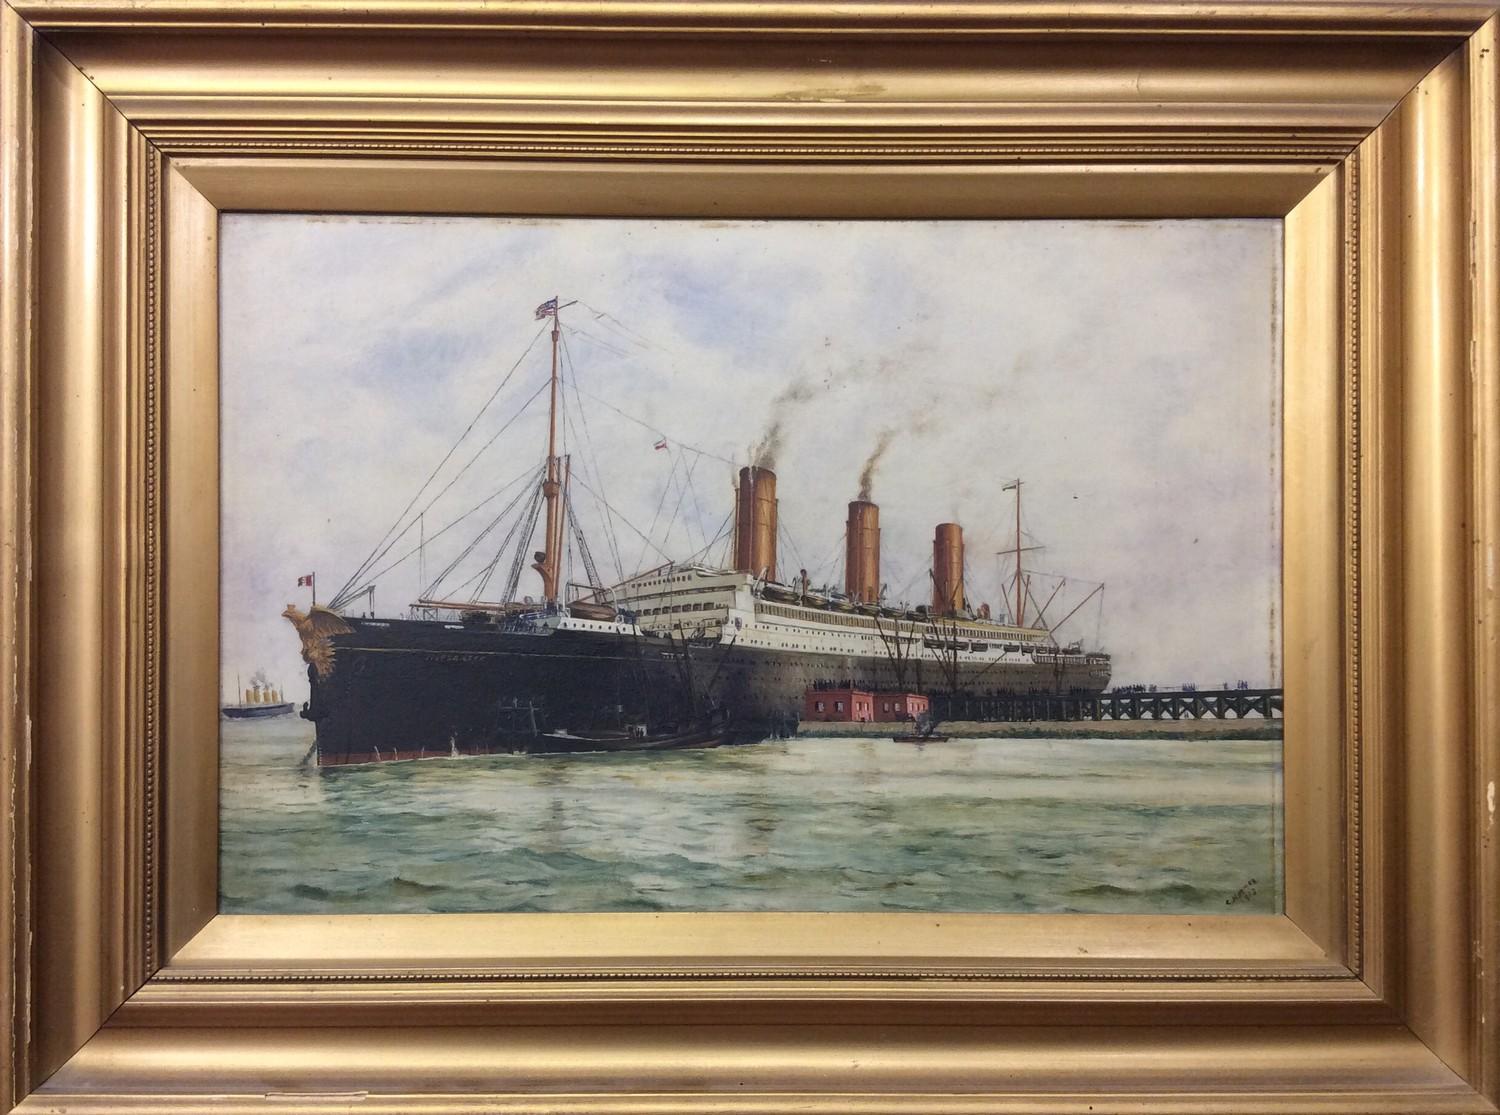 C. Notter (late 19th / early 20th century), The American passenger liner SS Imperator, at anchor